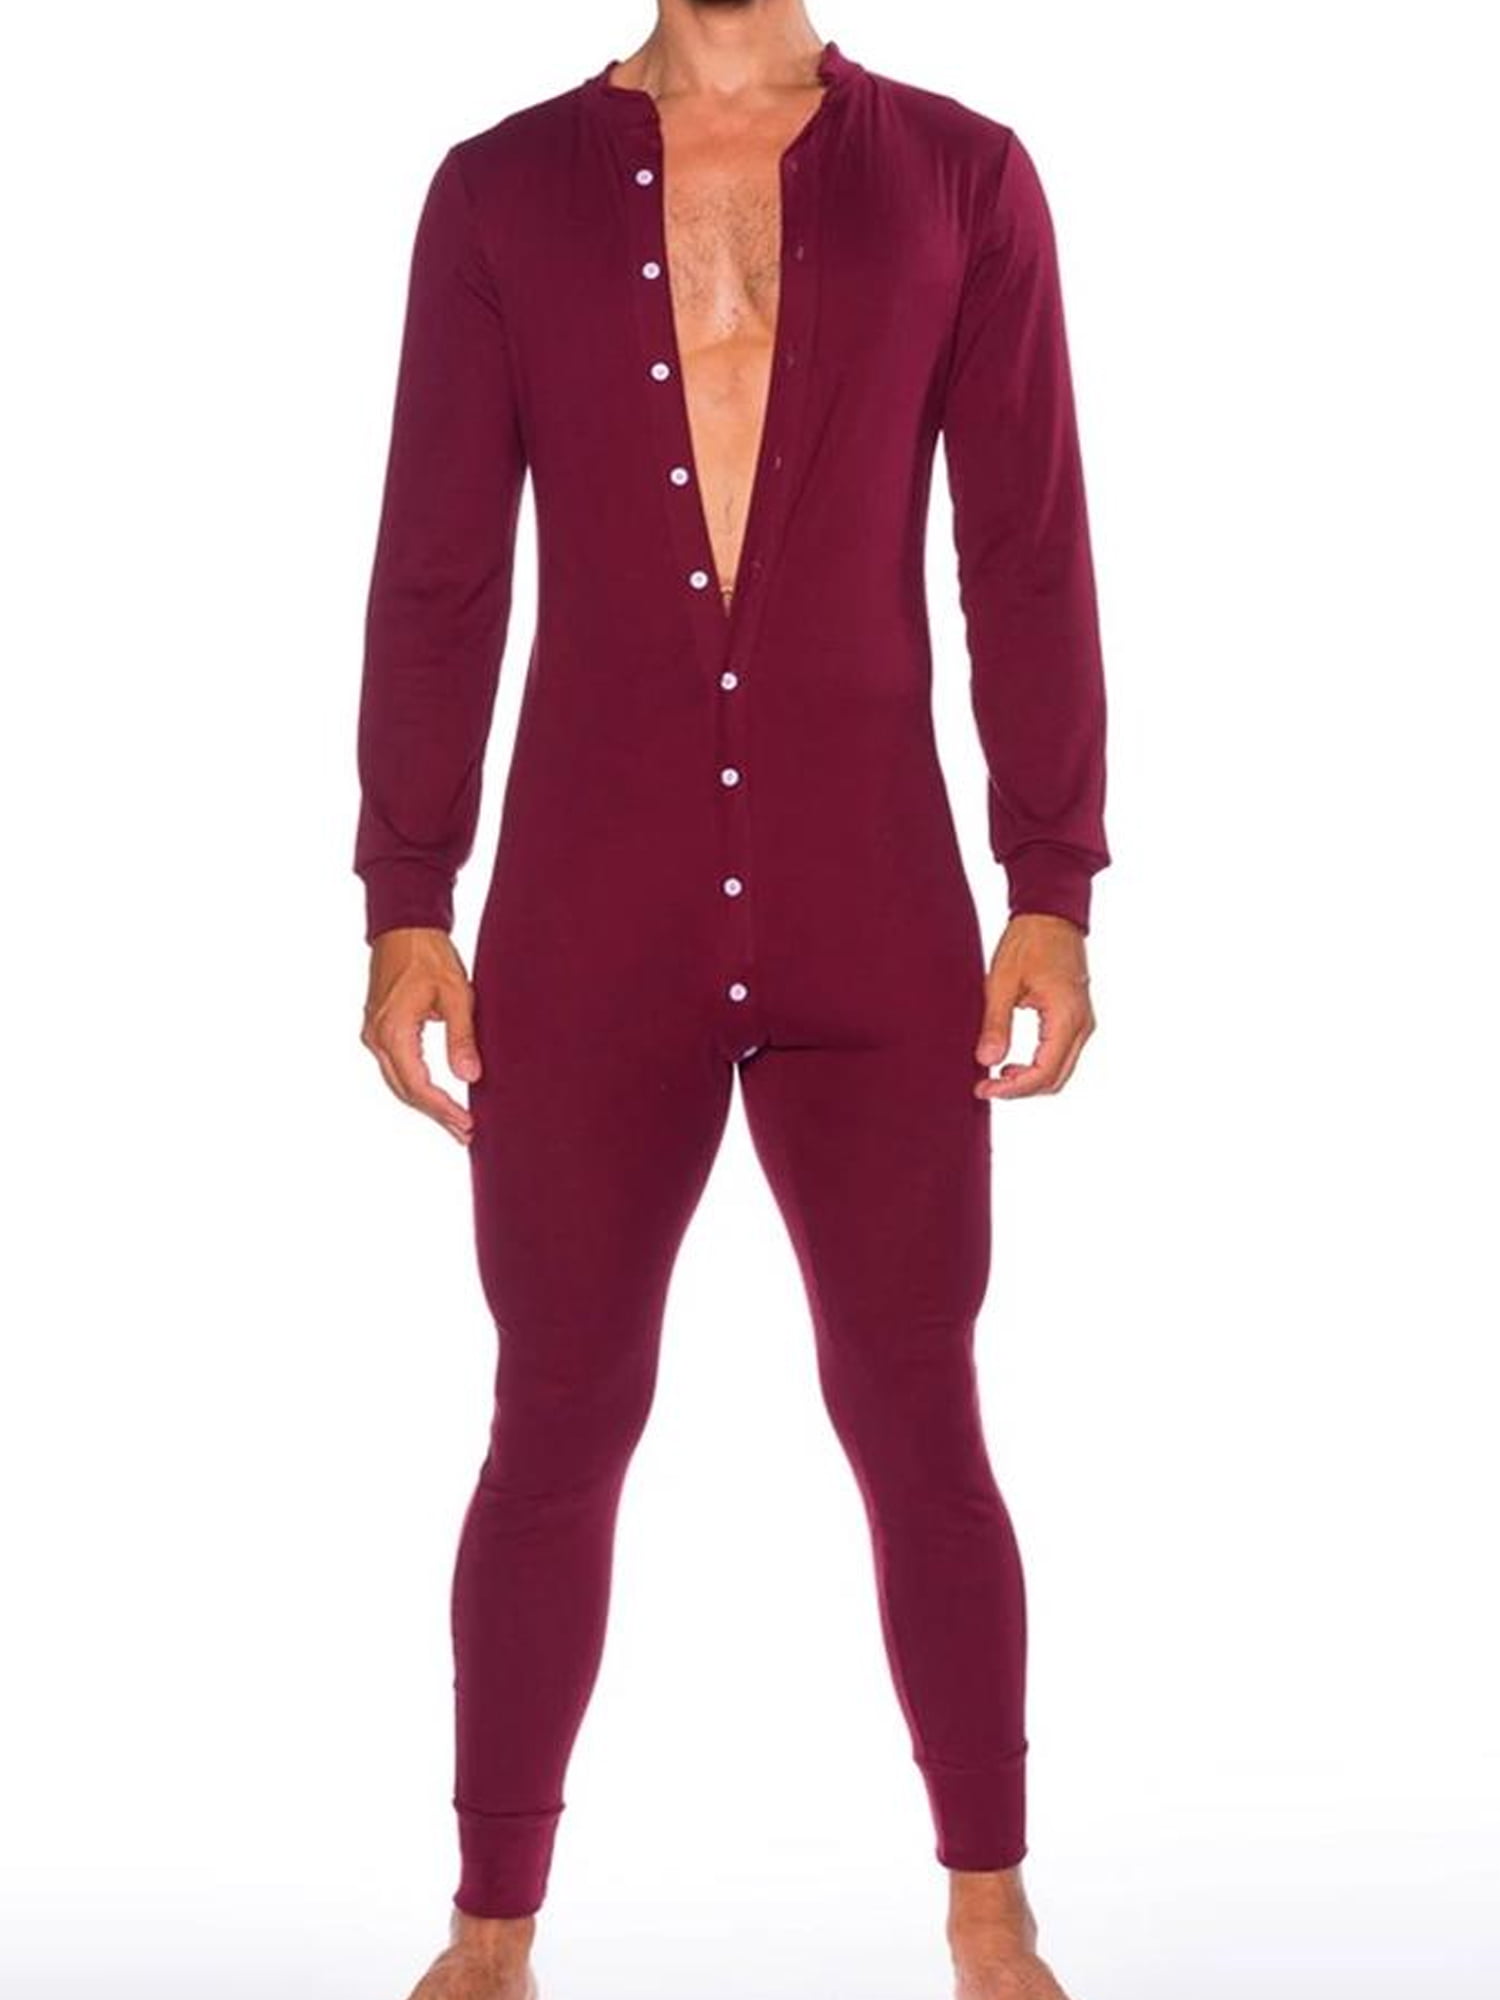 Details about   Mens one piece Long Sleeve Front Button Down Jumpsuit pyjamas Sleepwear Pajamas